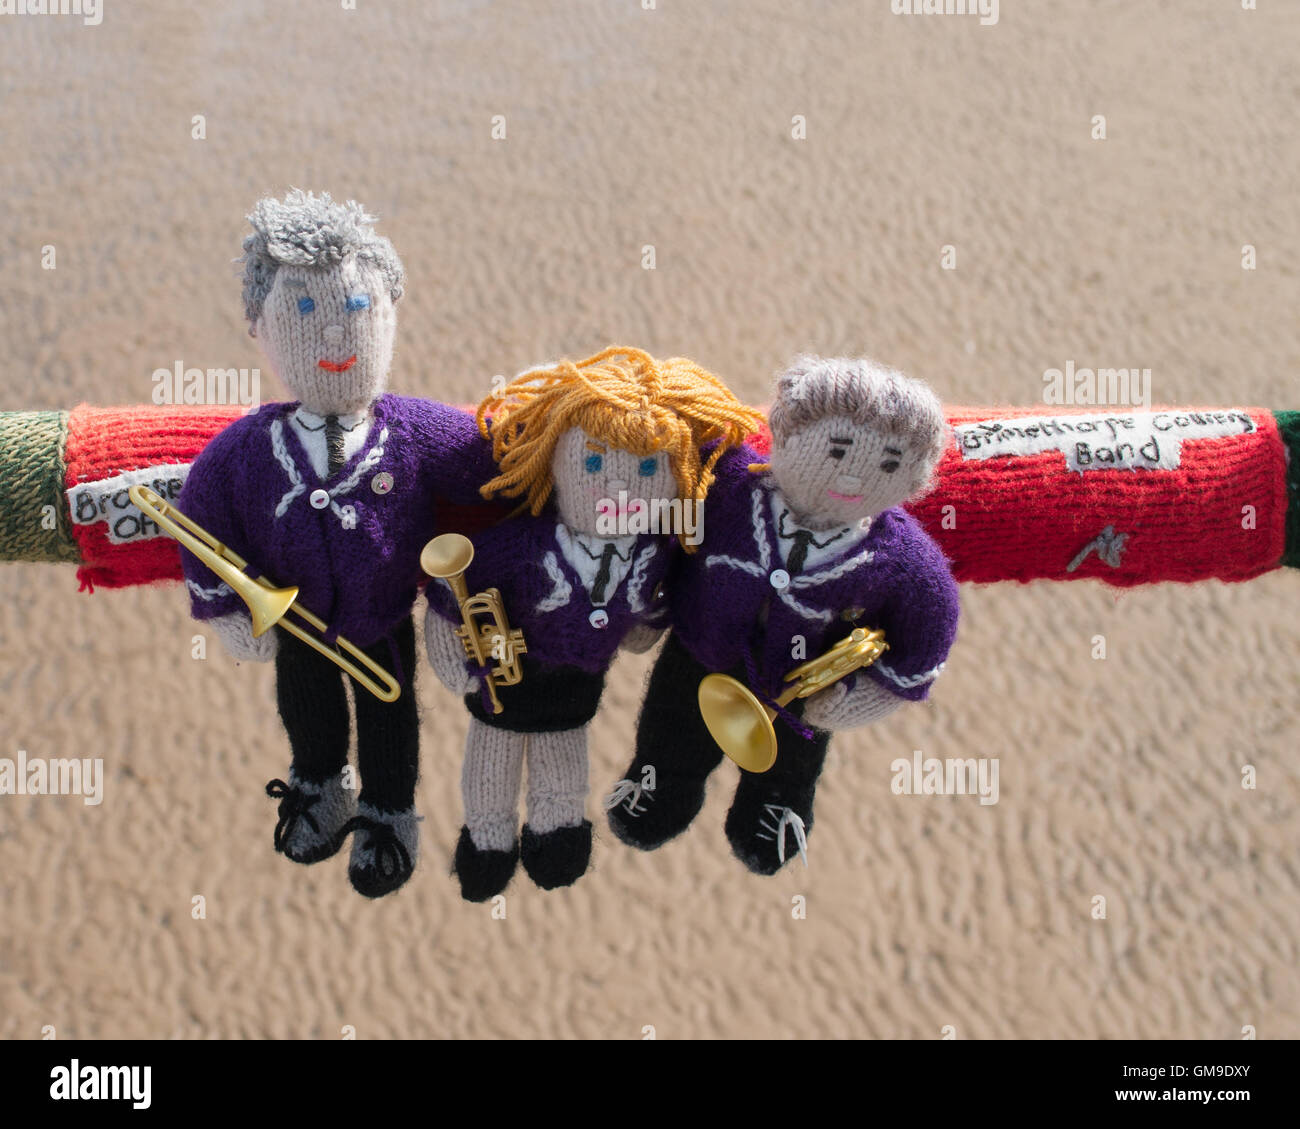 Knitted brass band players with text Grimethorpe Colliery Band on the pier at Saltburn by the Sea, North Yorkshire, England, UK Stock Photo